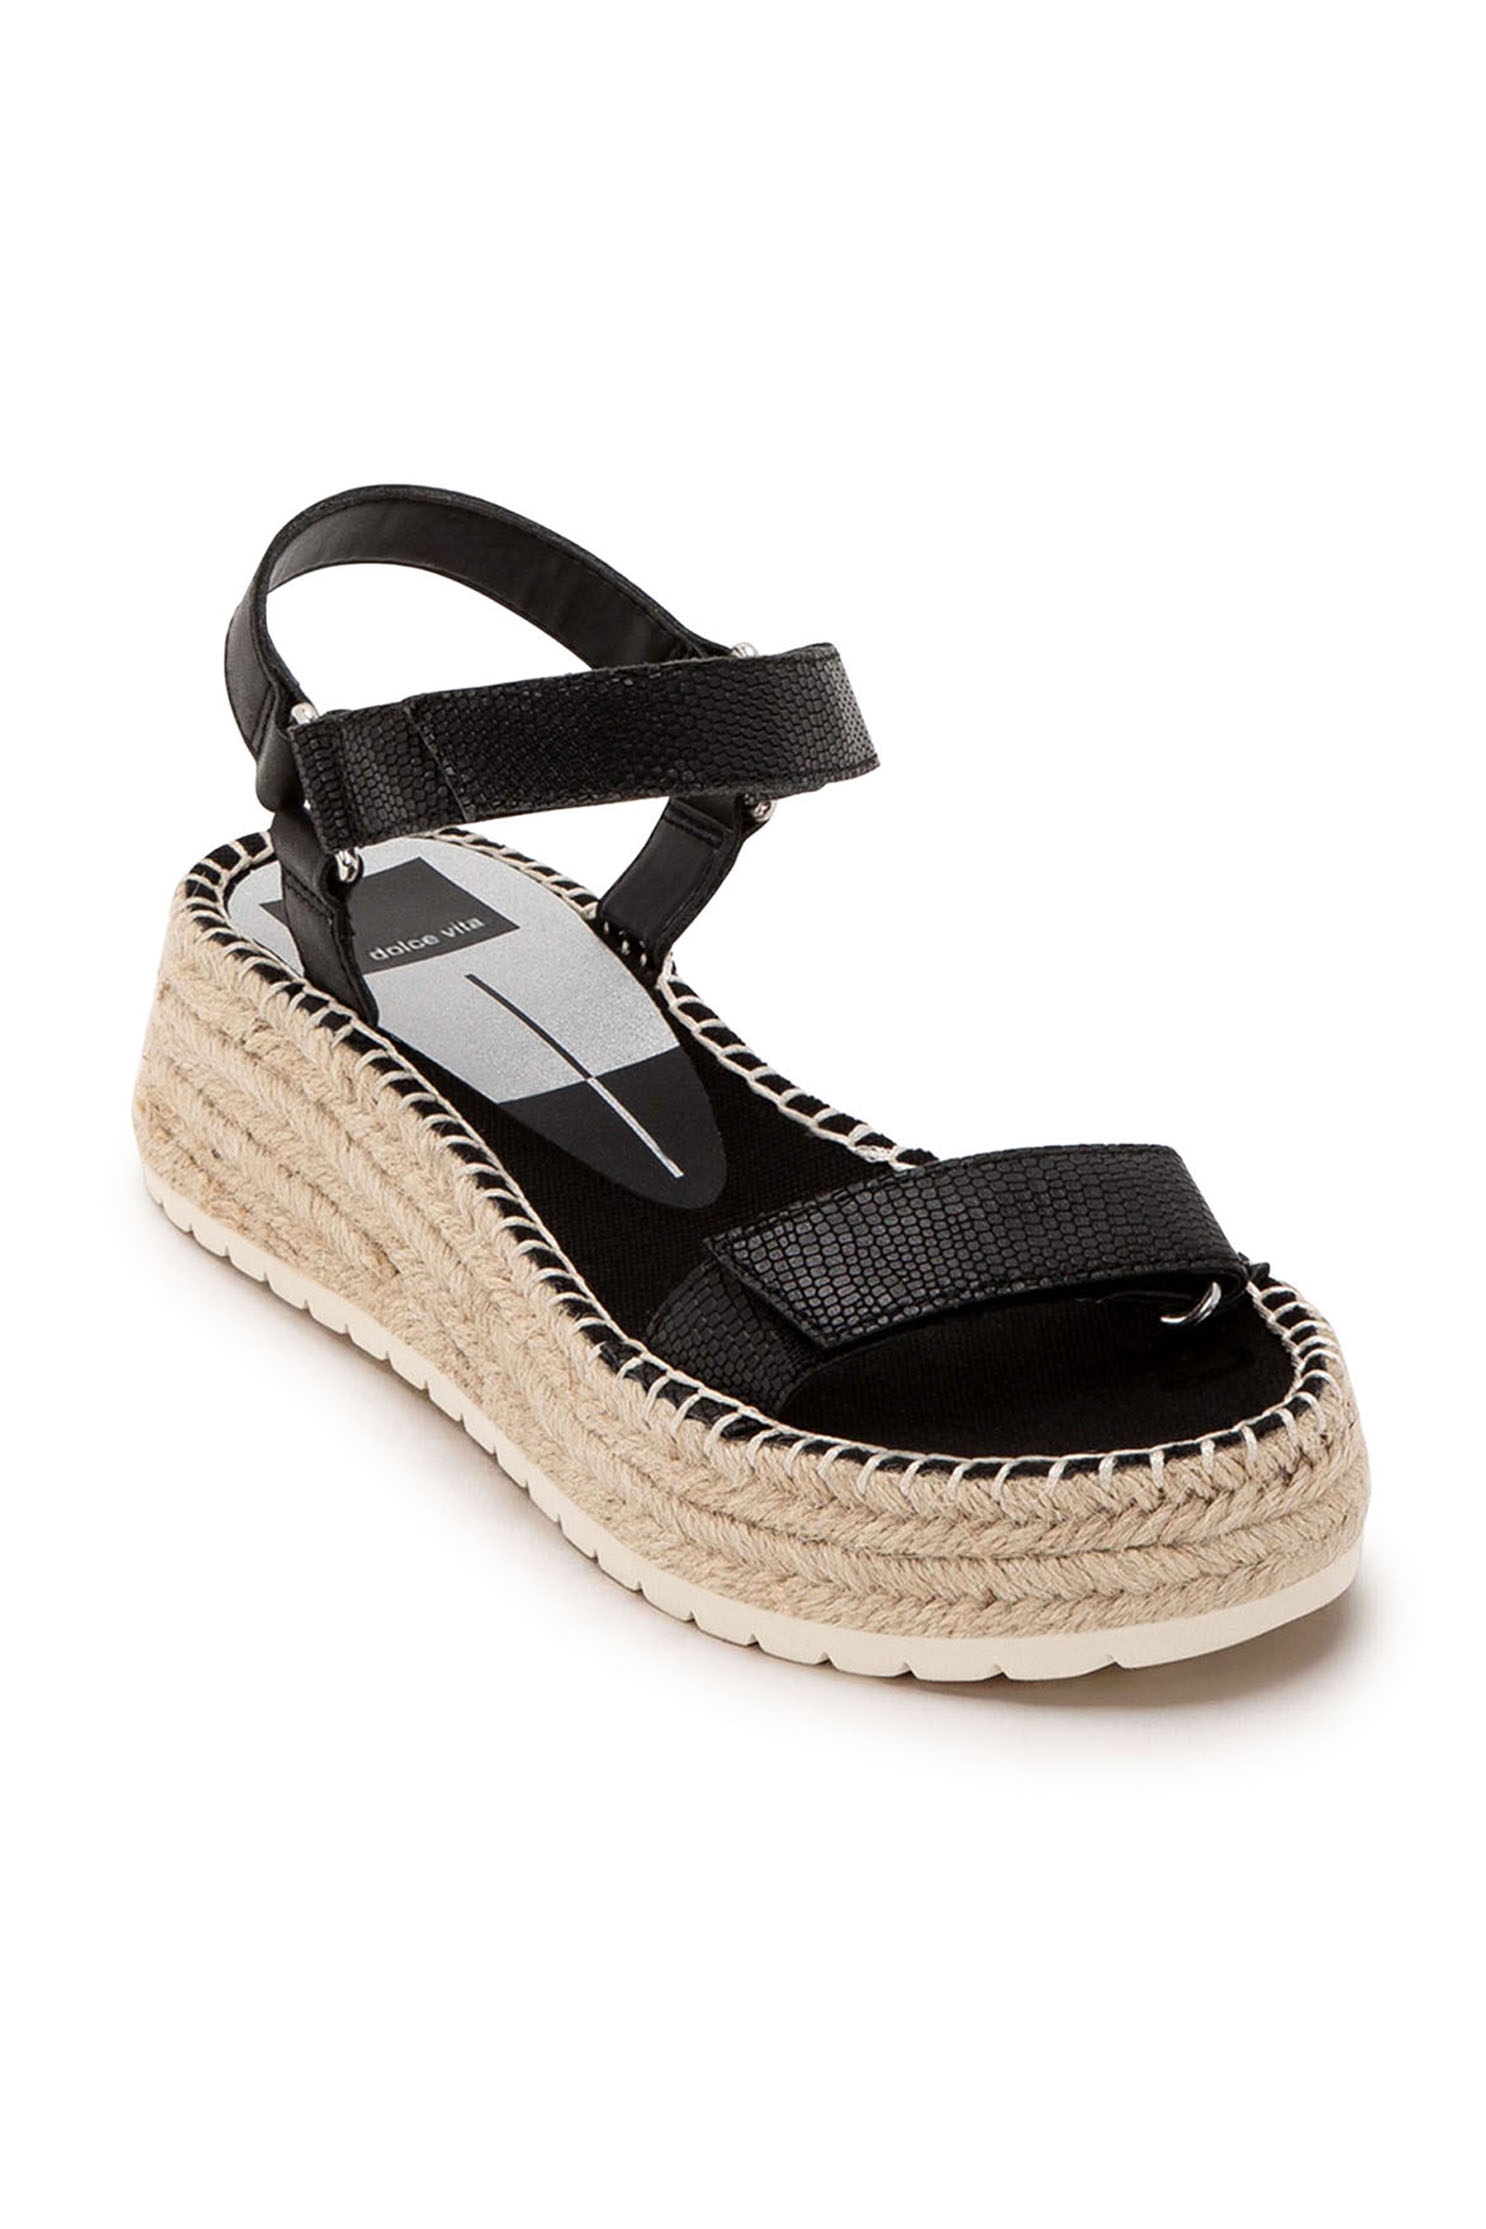 DOLCE VITA Black Espadrille Wedged Sandals | Long Tall Sally